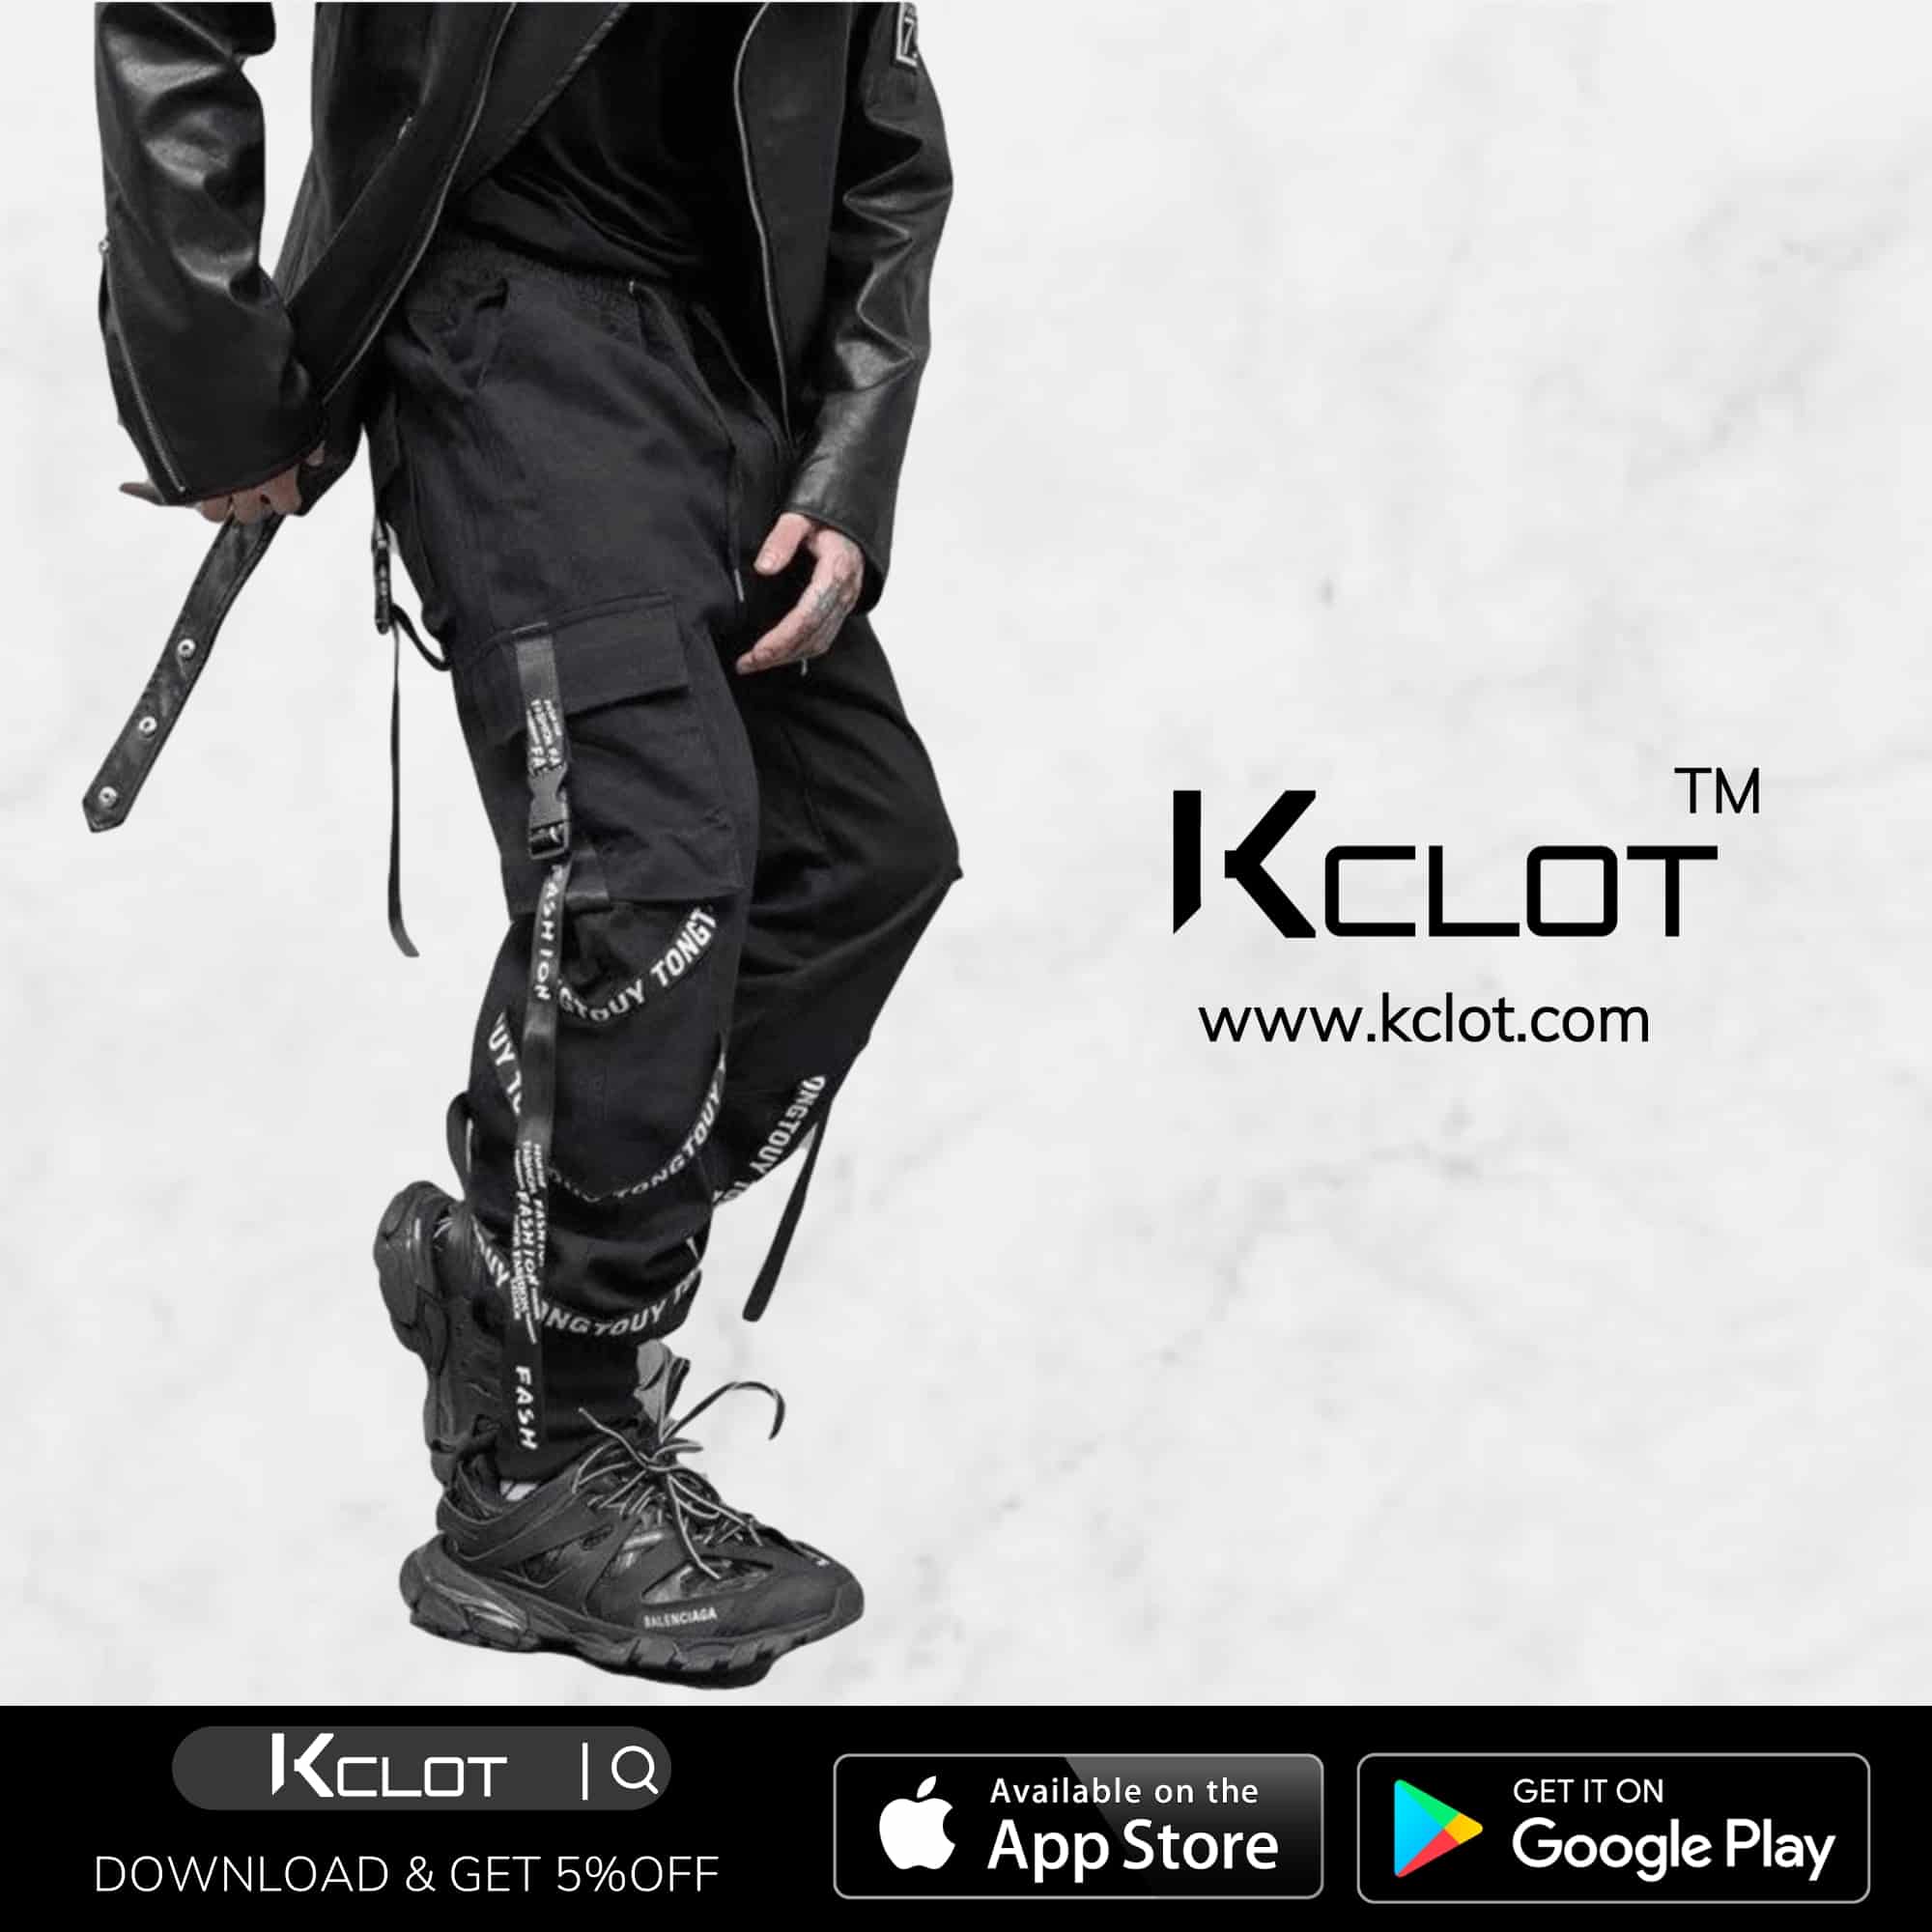 A Review Of The Cheap Clothing Brand KCLOT